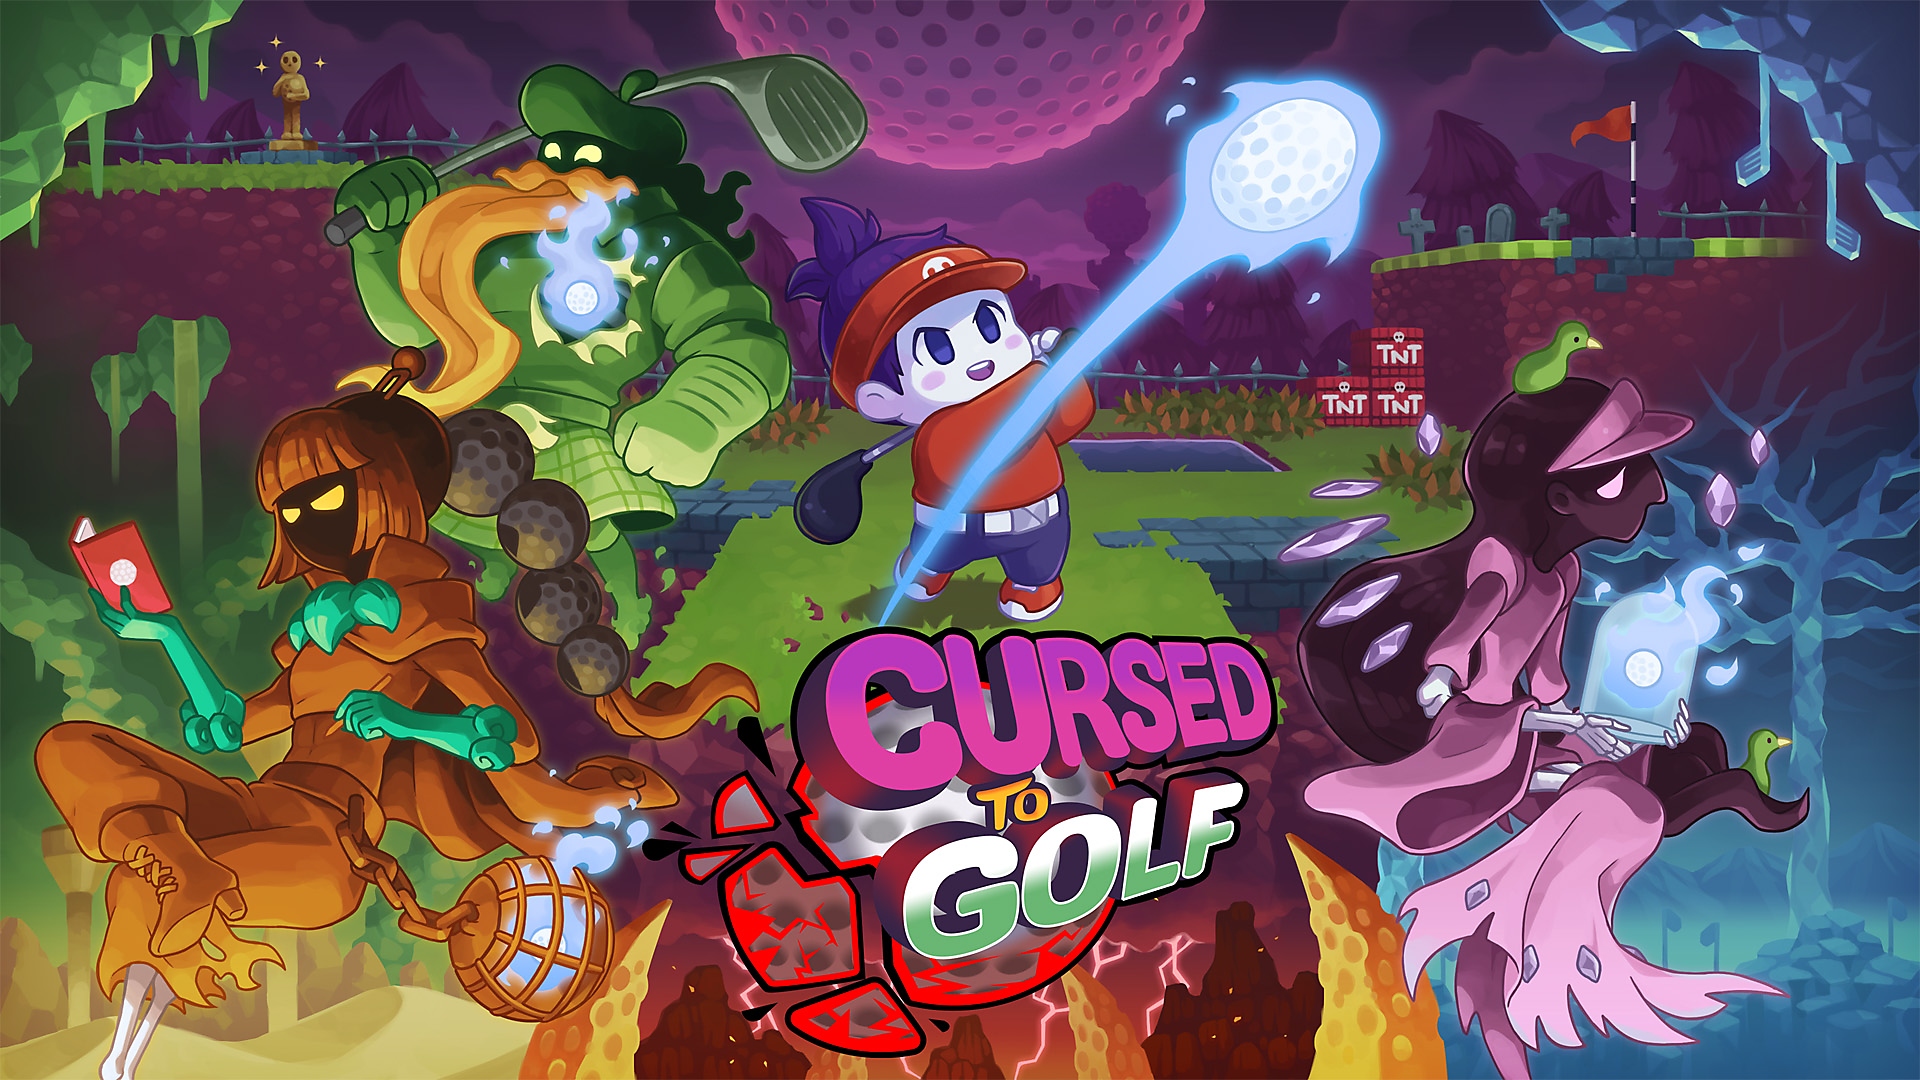 Cursed to Golf - Are You ready to Golf!? - Date annoncée | Jeux PS5 et PS4 Games